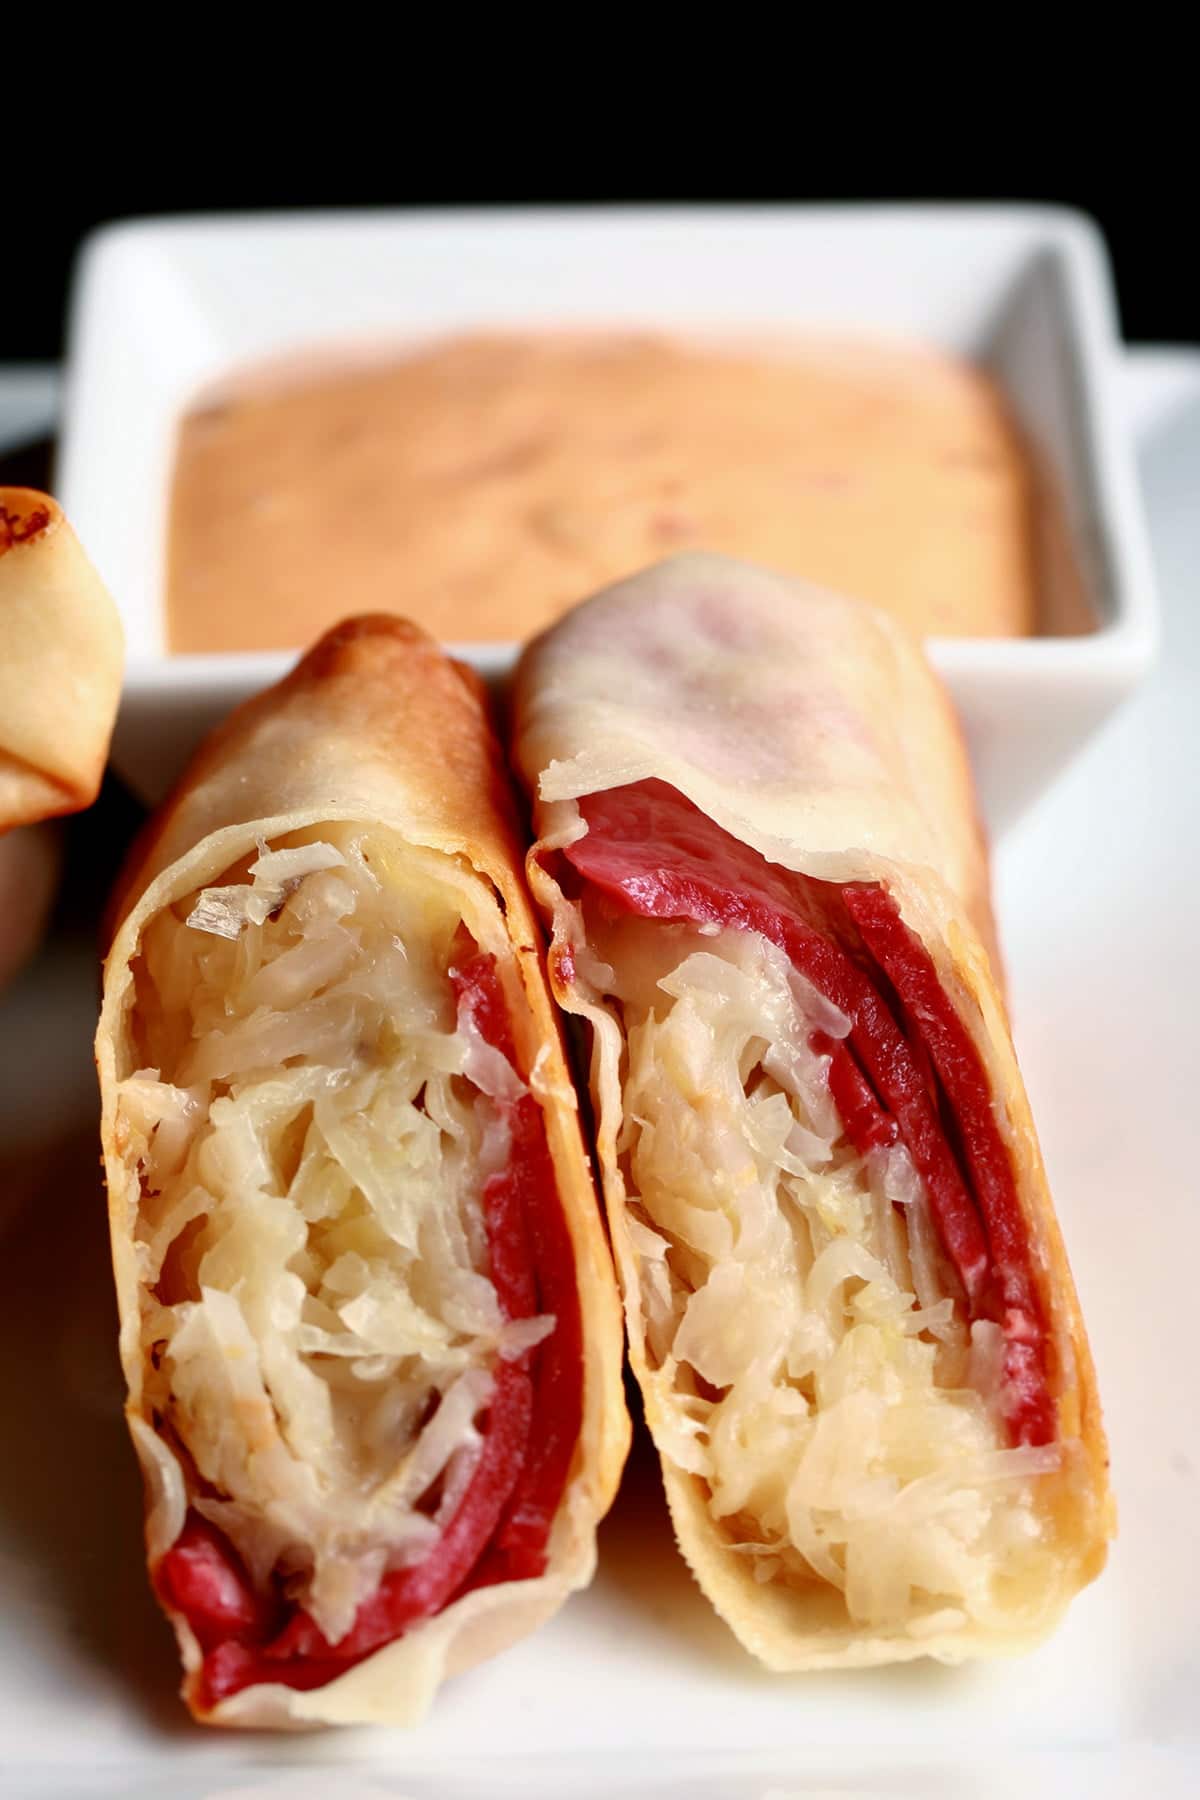 A white plate is piled with baked Reuben egg rolls, with one cut in half. There is a small bowl of thousand island dressing on the plate, as well.